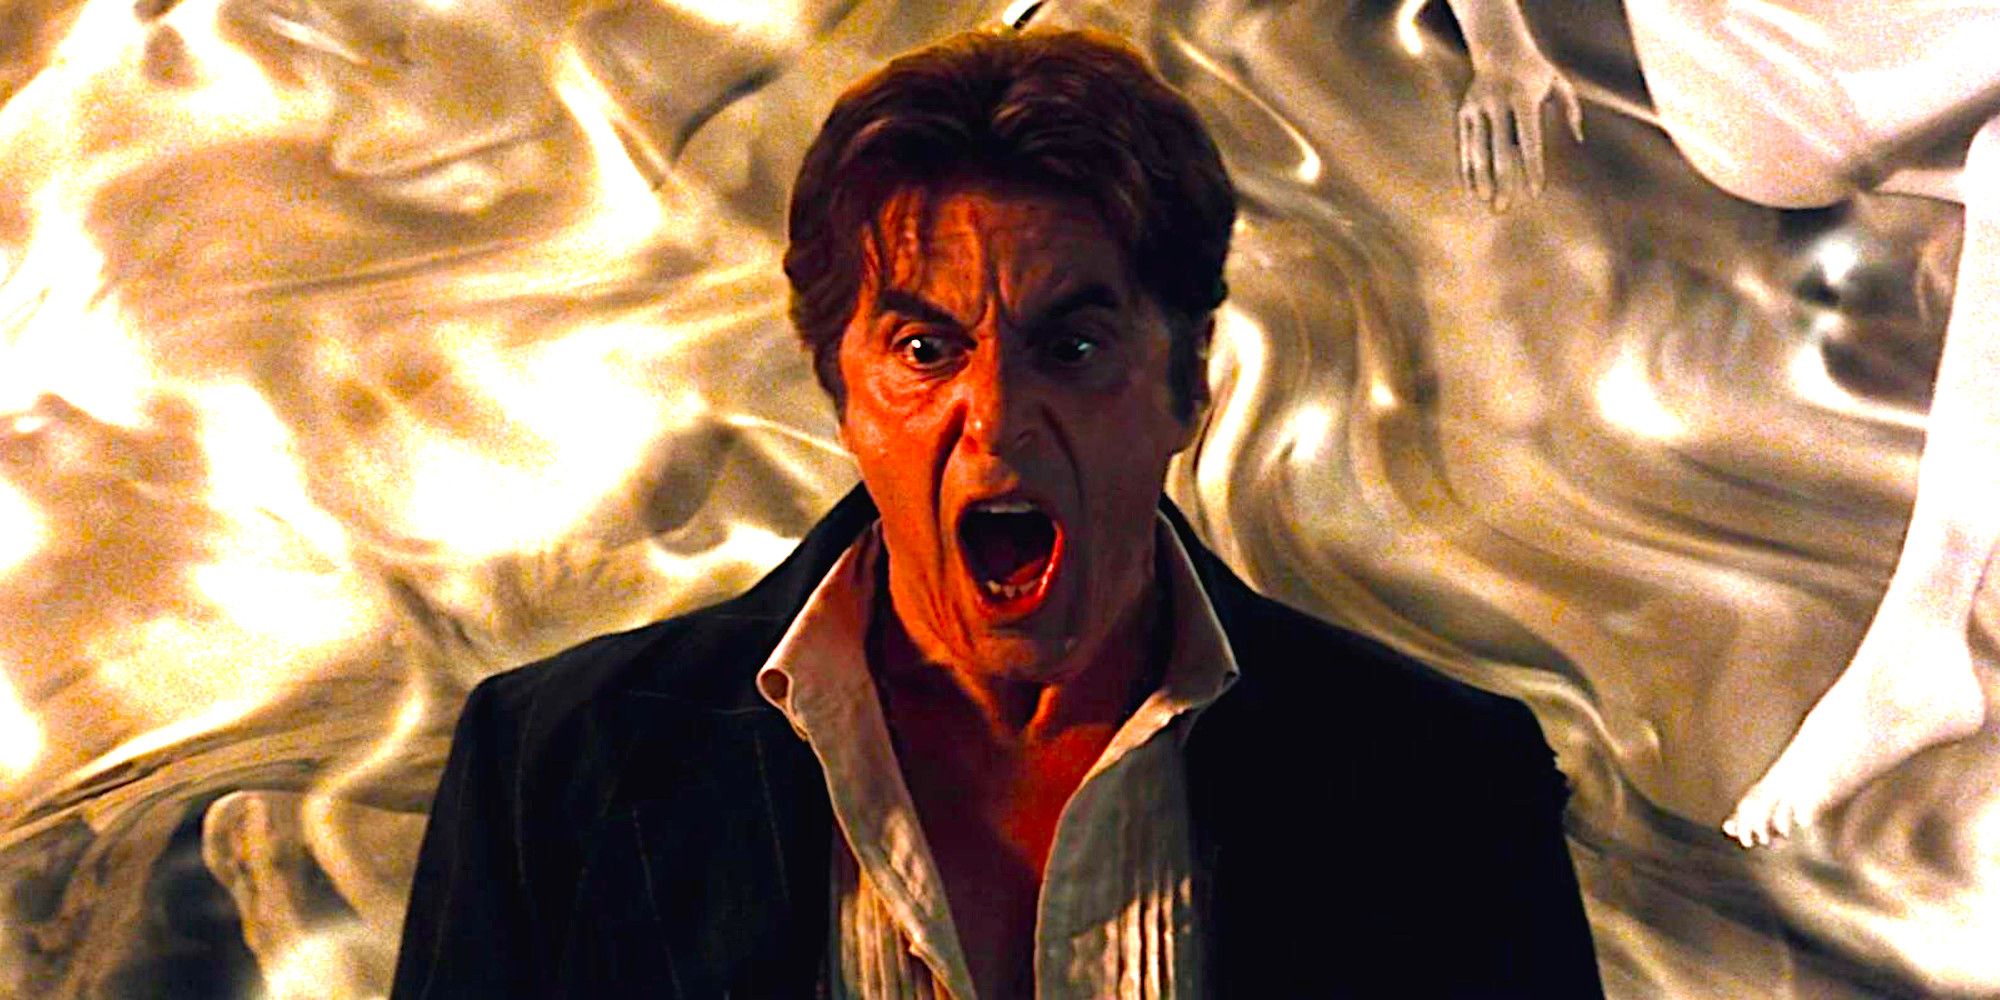 Al Pacino howling maniacally in a scene from The Devil's Advocate